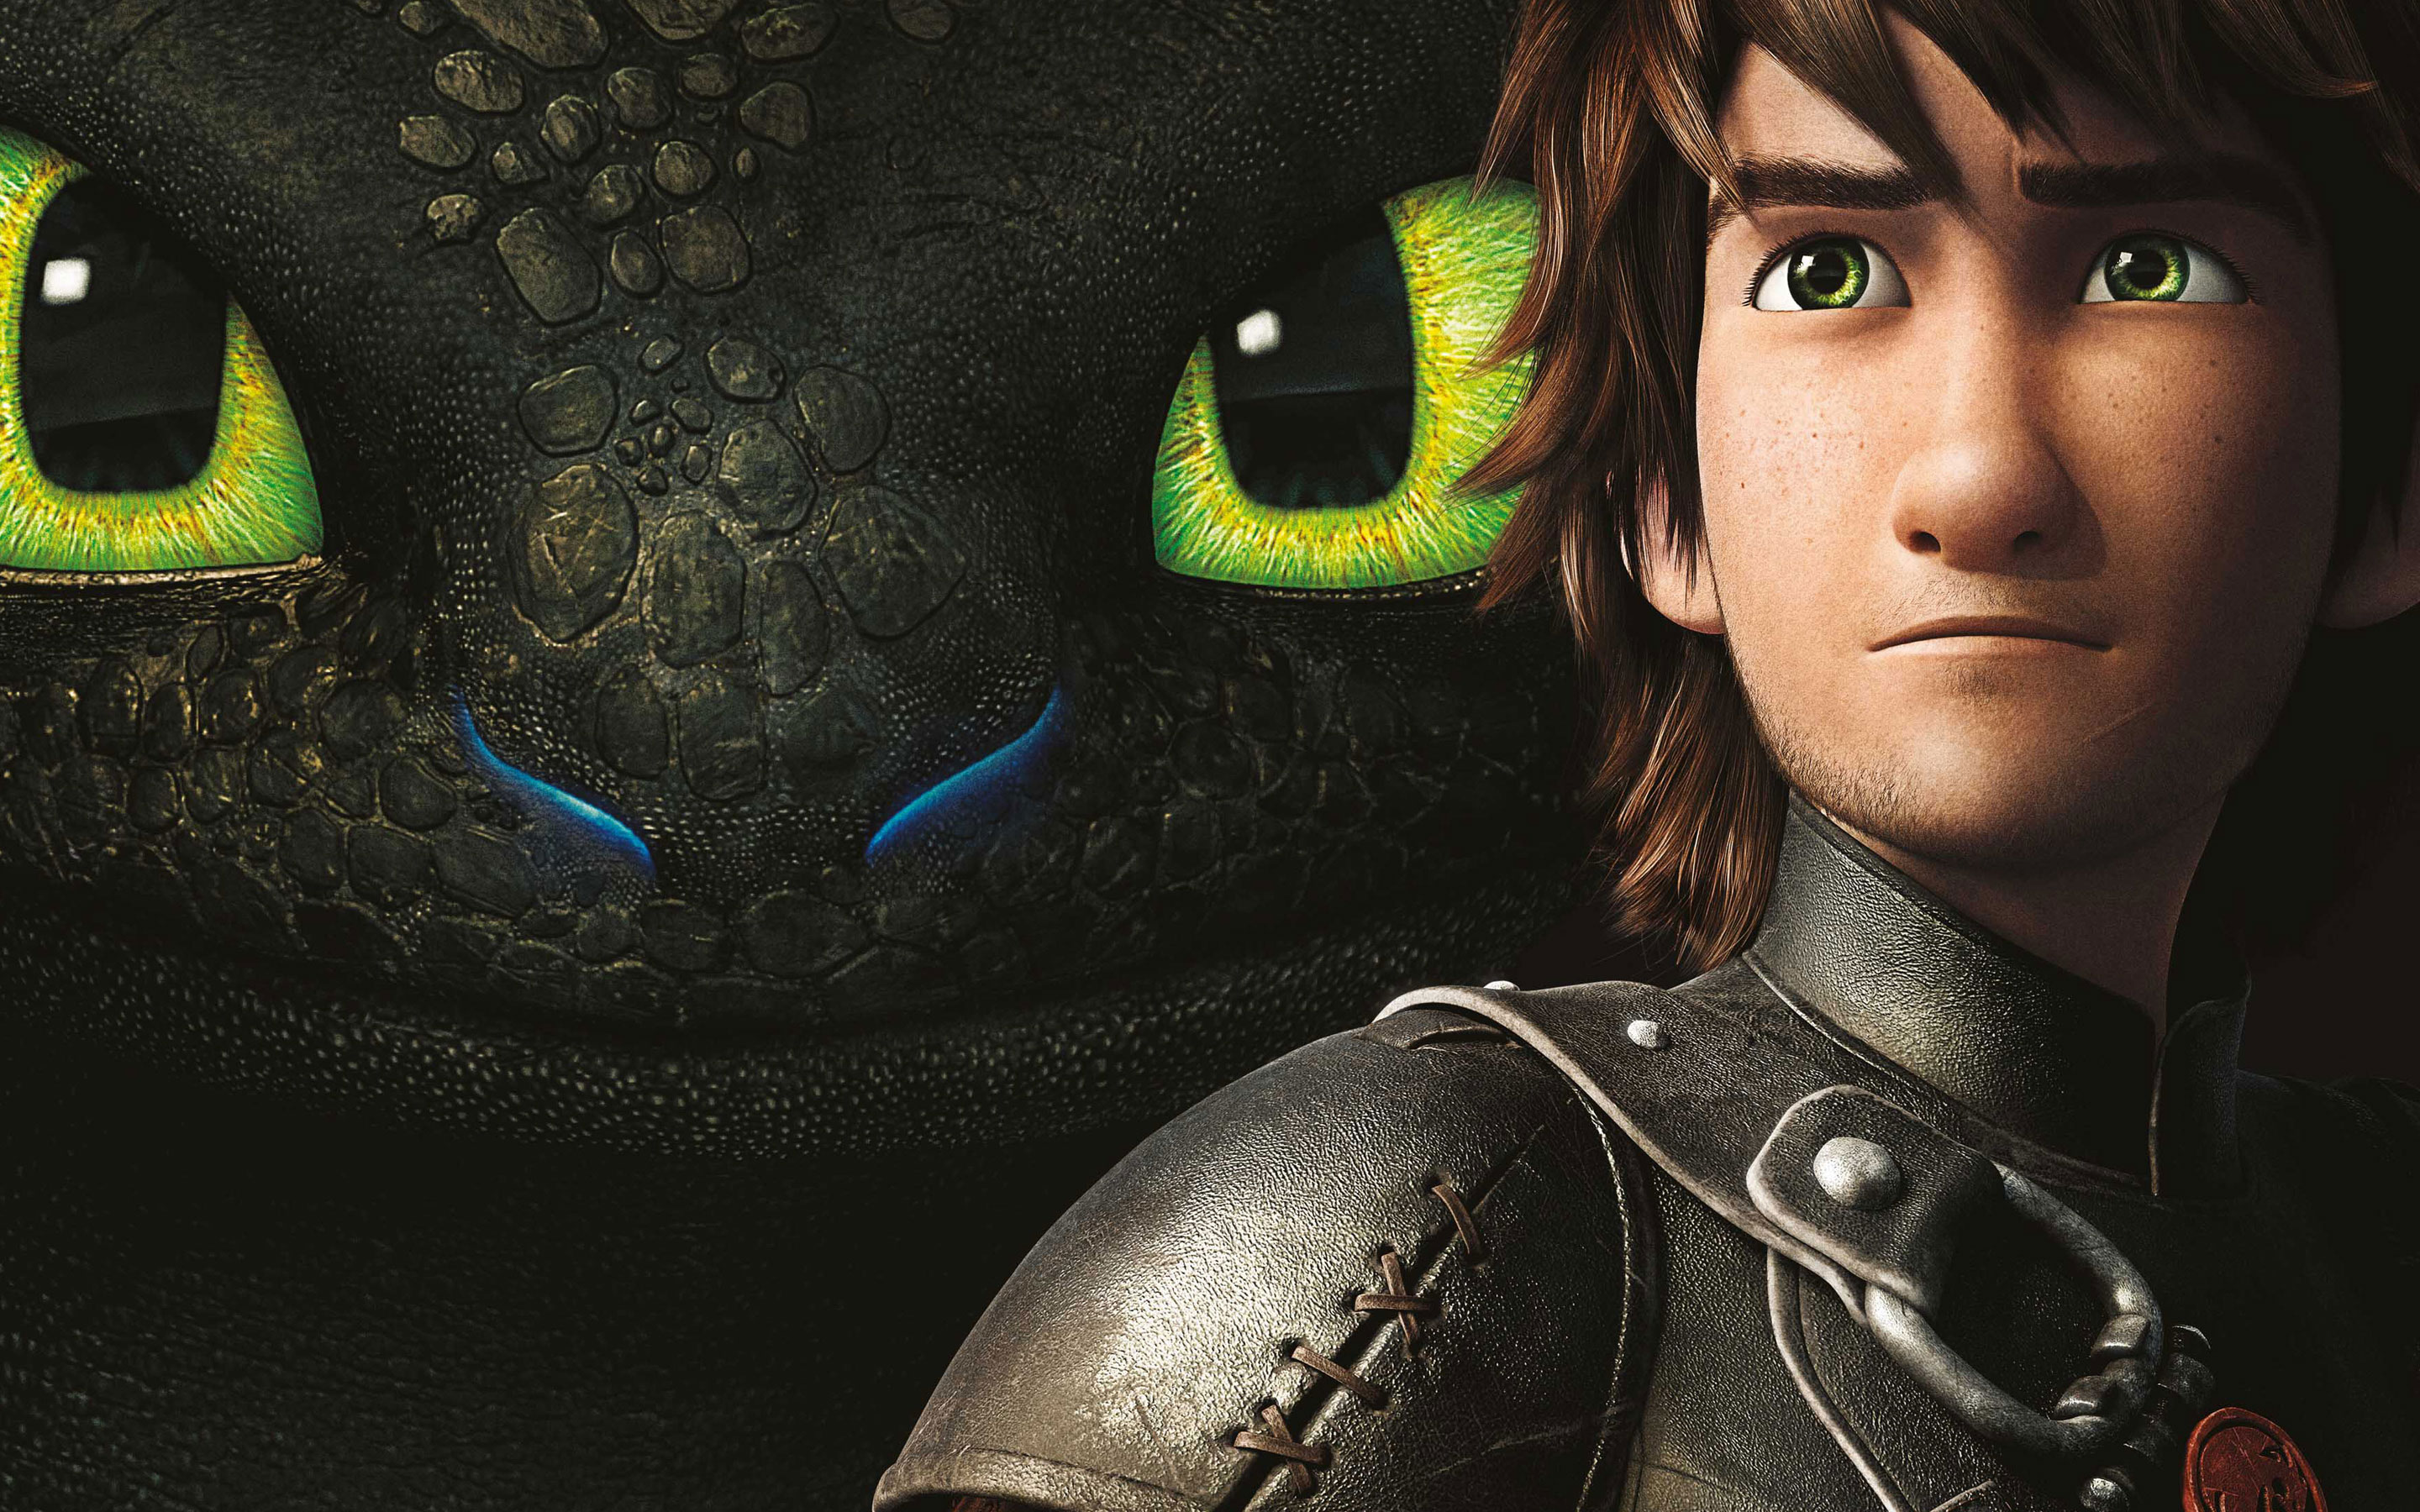 toothless how to train your dragon 2 wallpaper